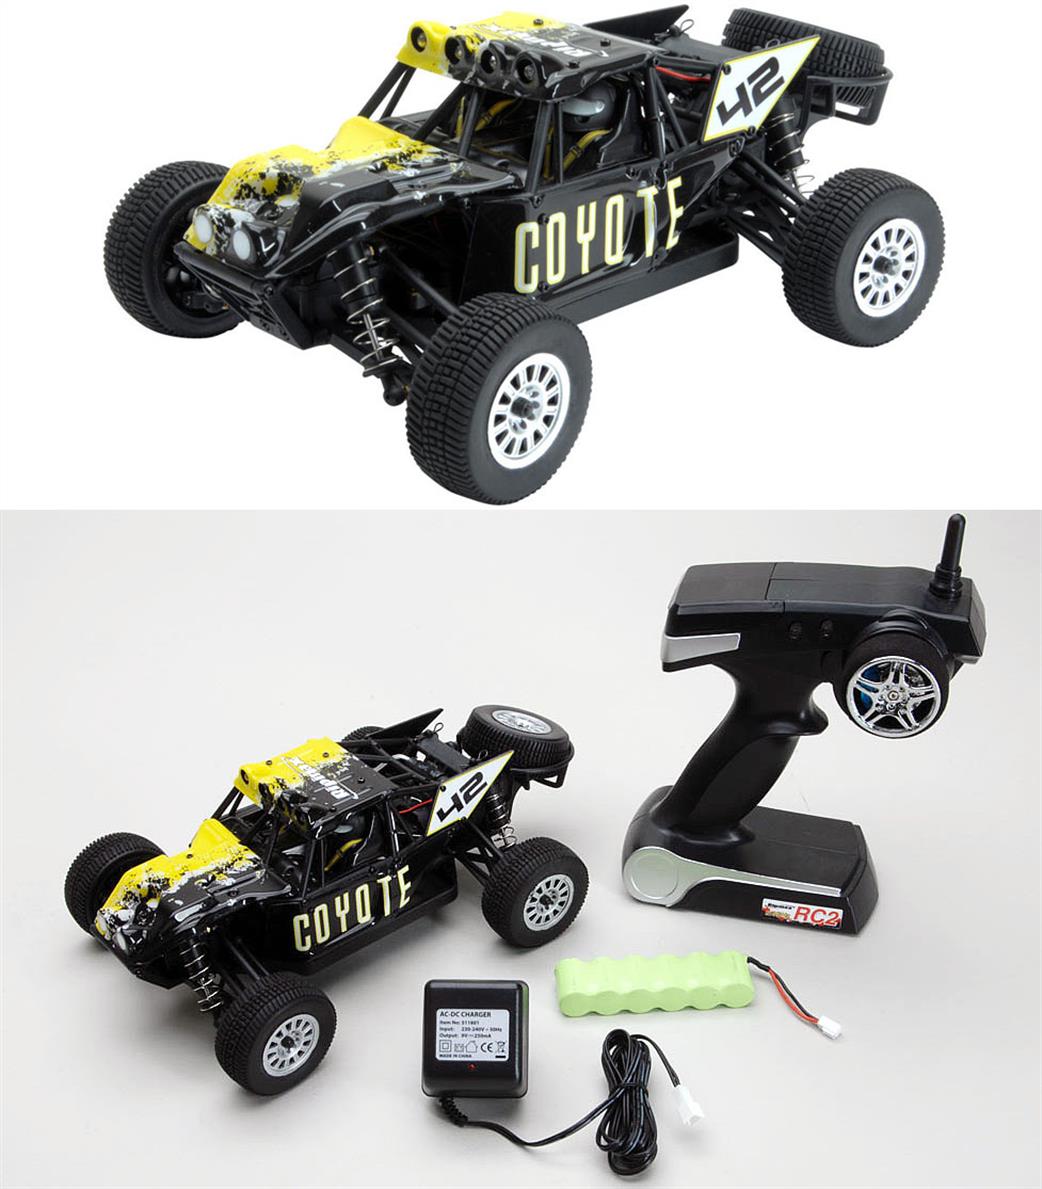 Ripmax 1/18 RMX0050 Coyote 4WD Off Road Desert Buggy RTR